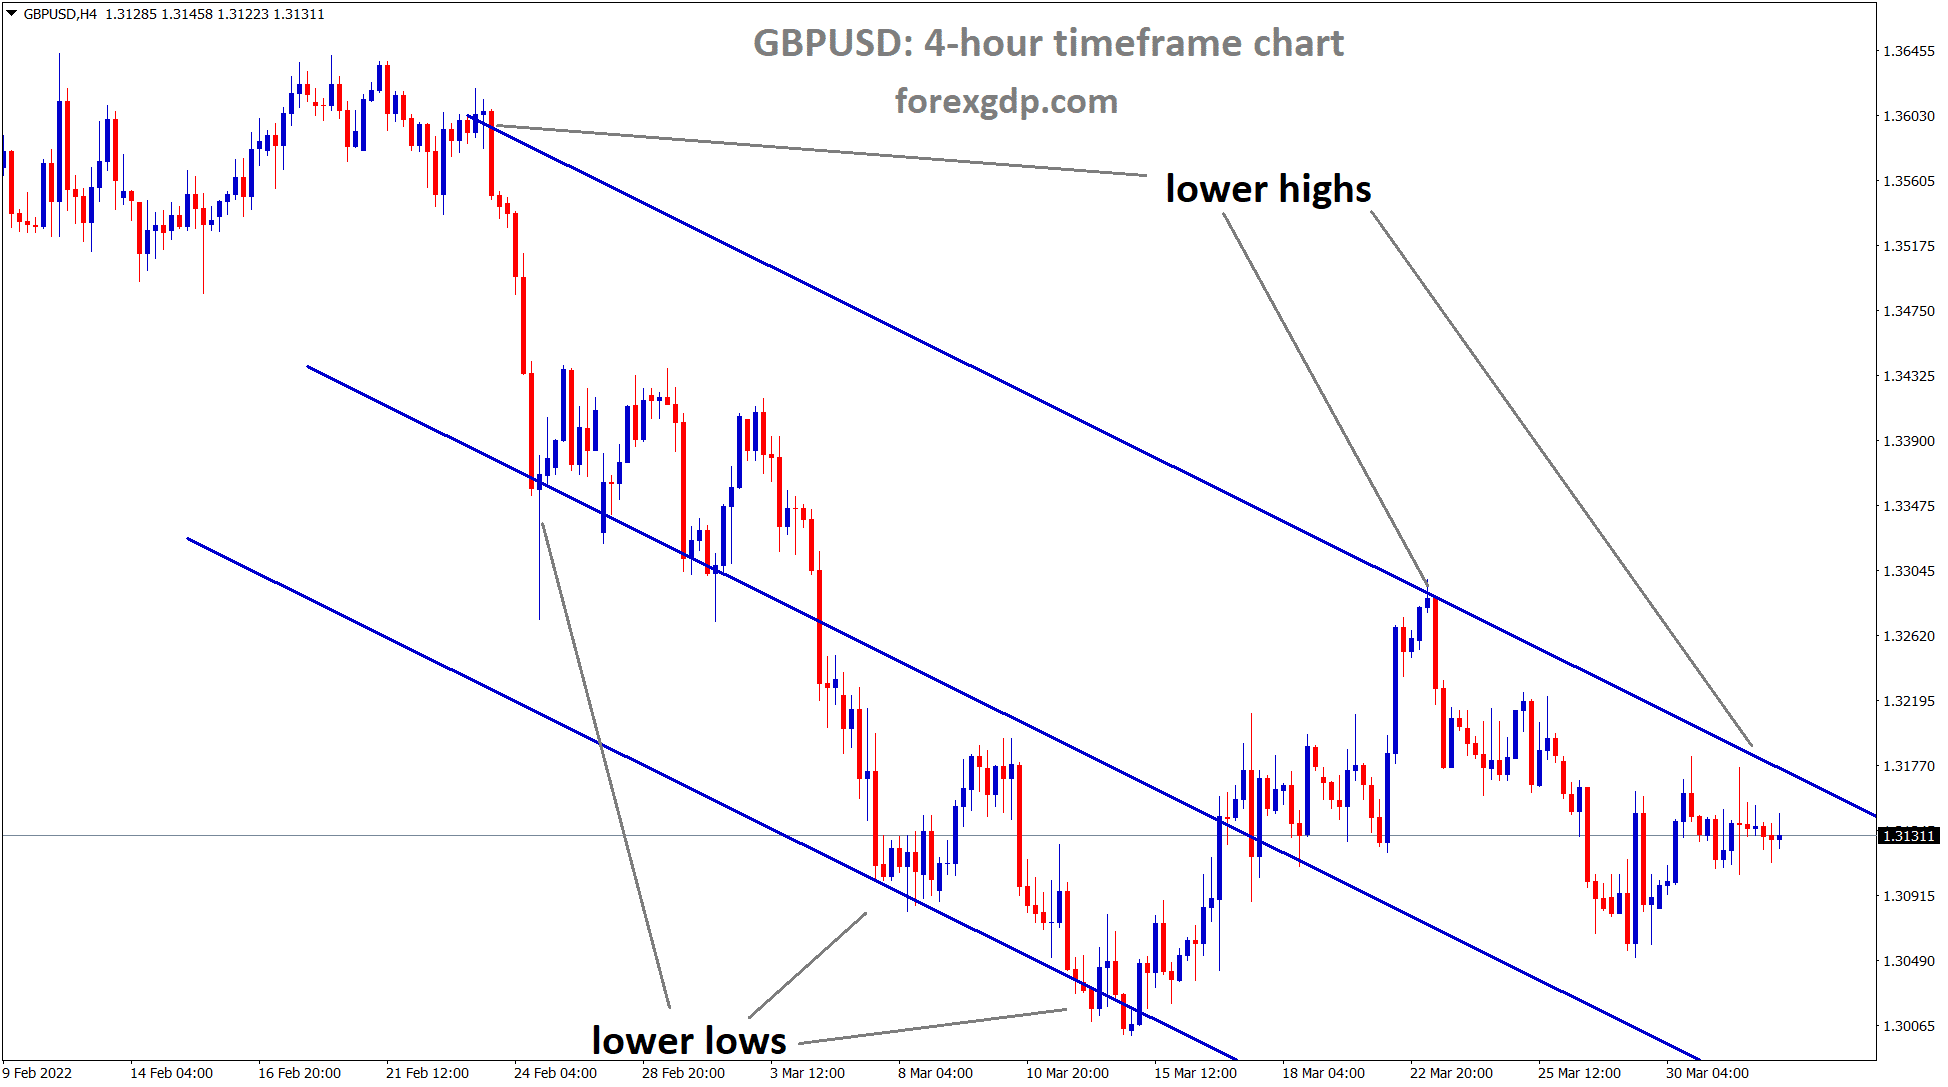 GBPUSD is consolidating at the lower high area of the descending channel in the 4 hour time frame chart